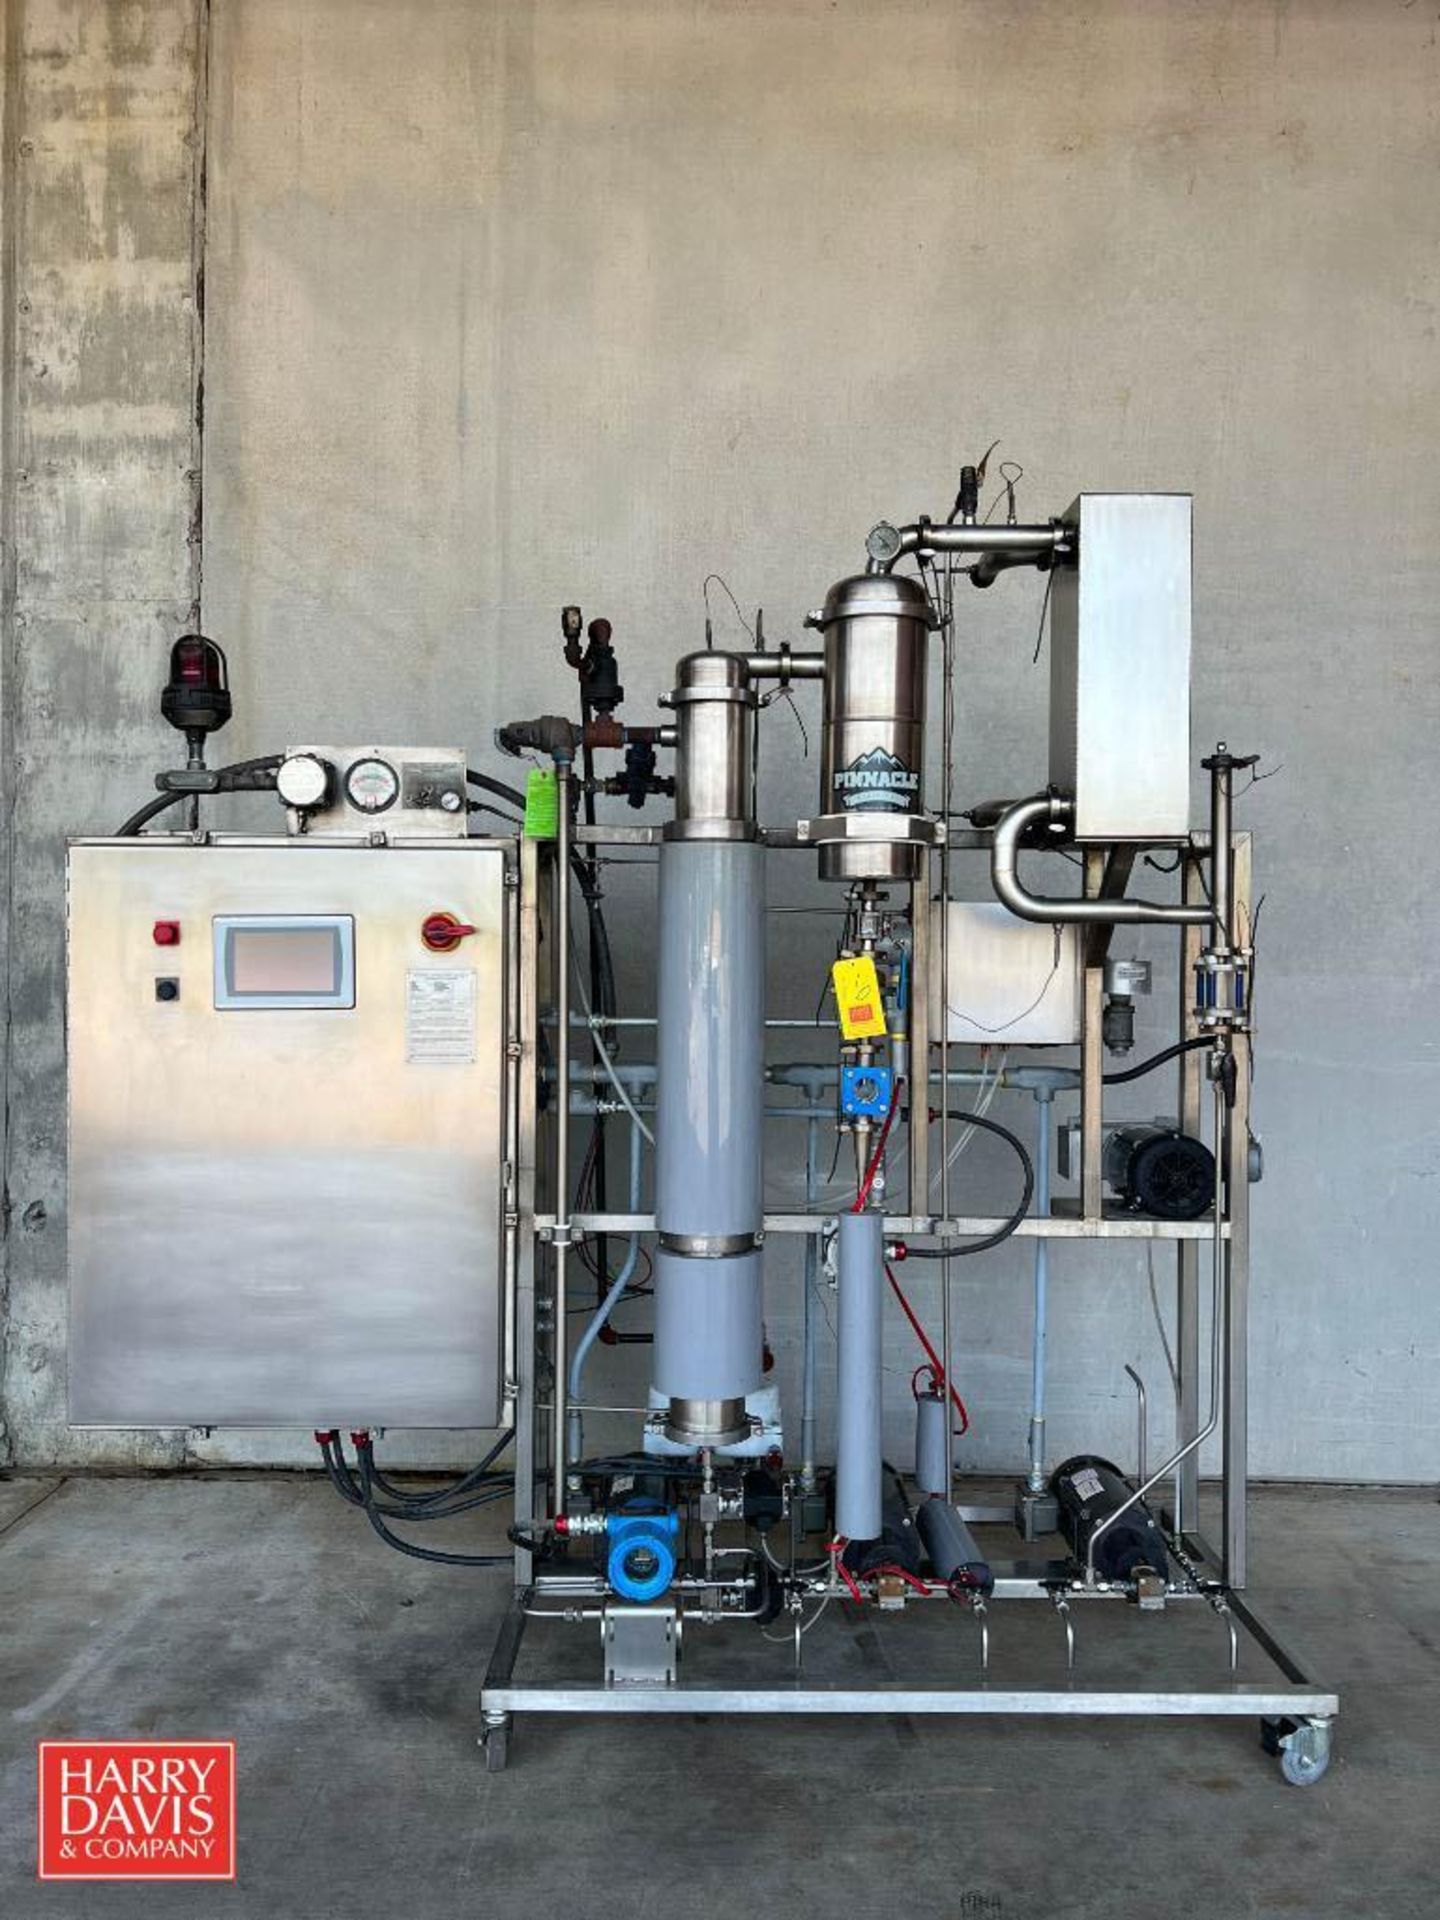 2018 Pinnacle Mobile S/S Solvent Recovery Skid, S/N: PSRS-053-19 with (3) Centrifugal Pumps